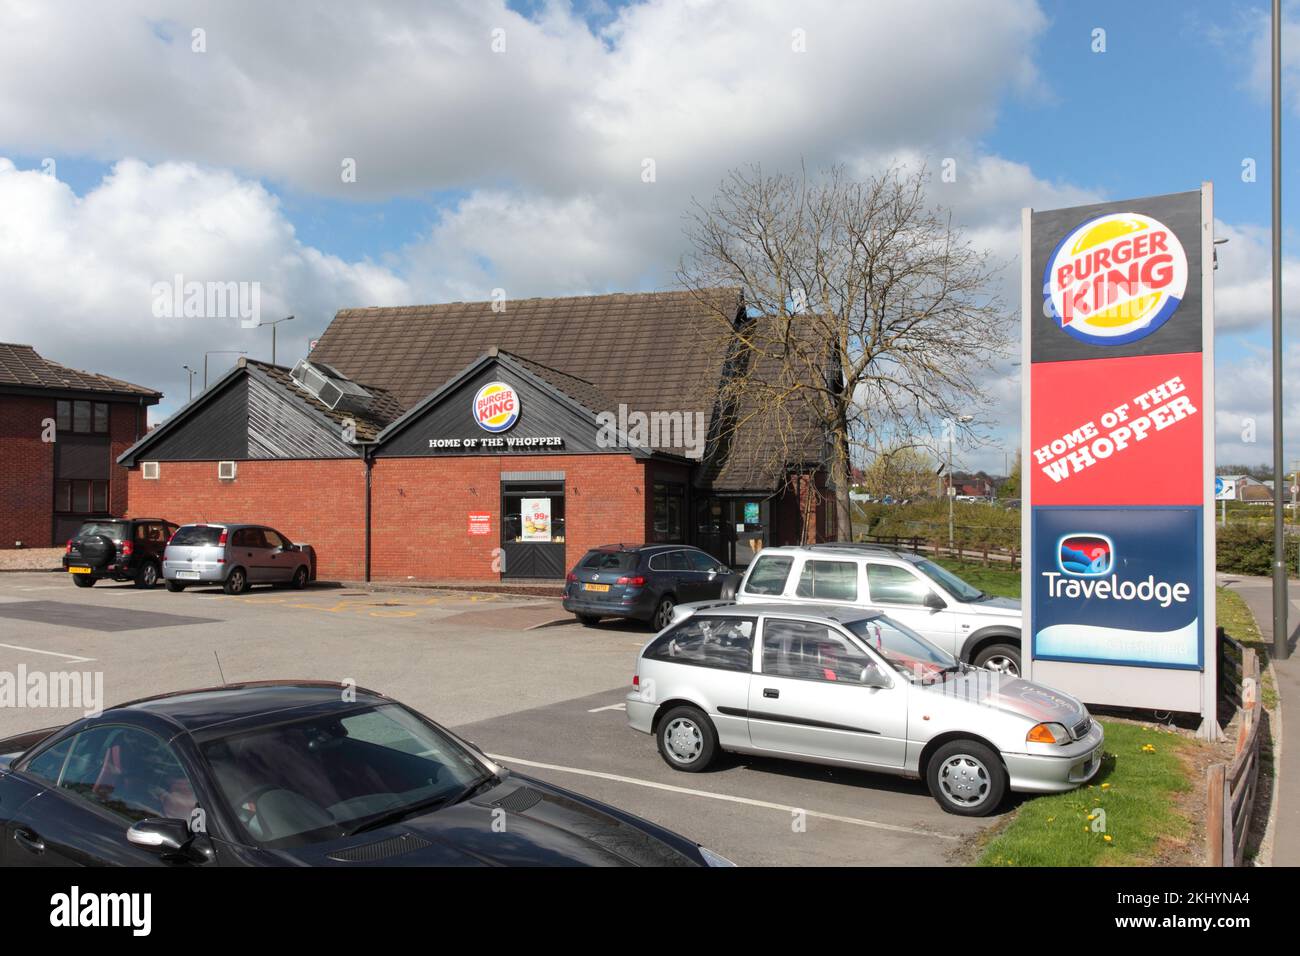 Travelodge/Burger King, Chesterfield Stock Photo